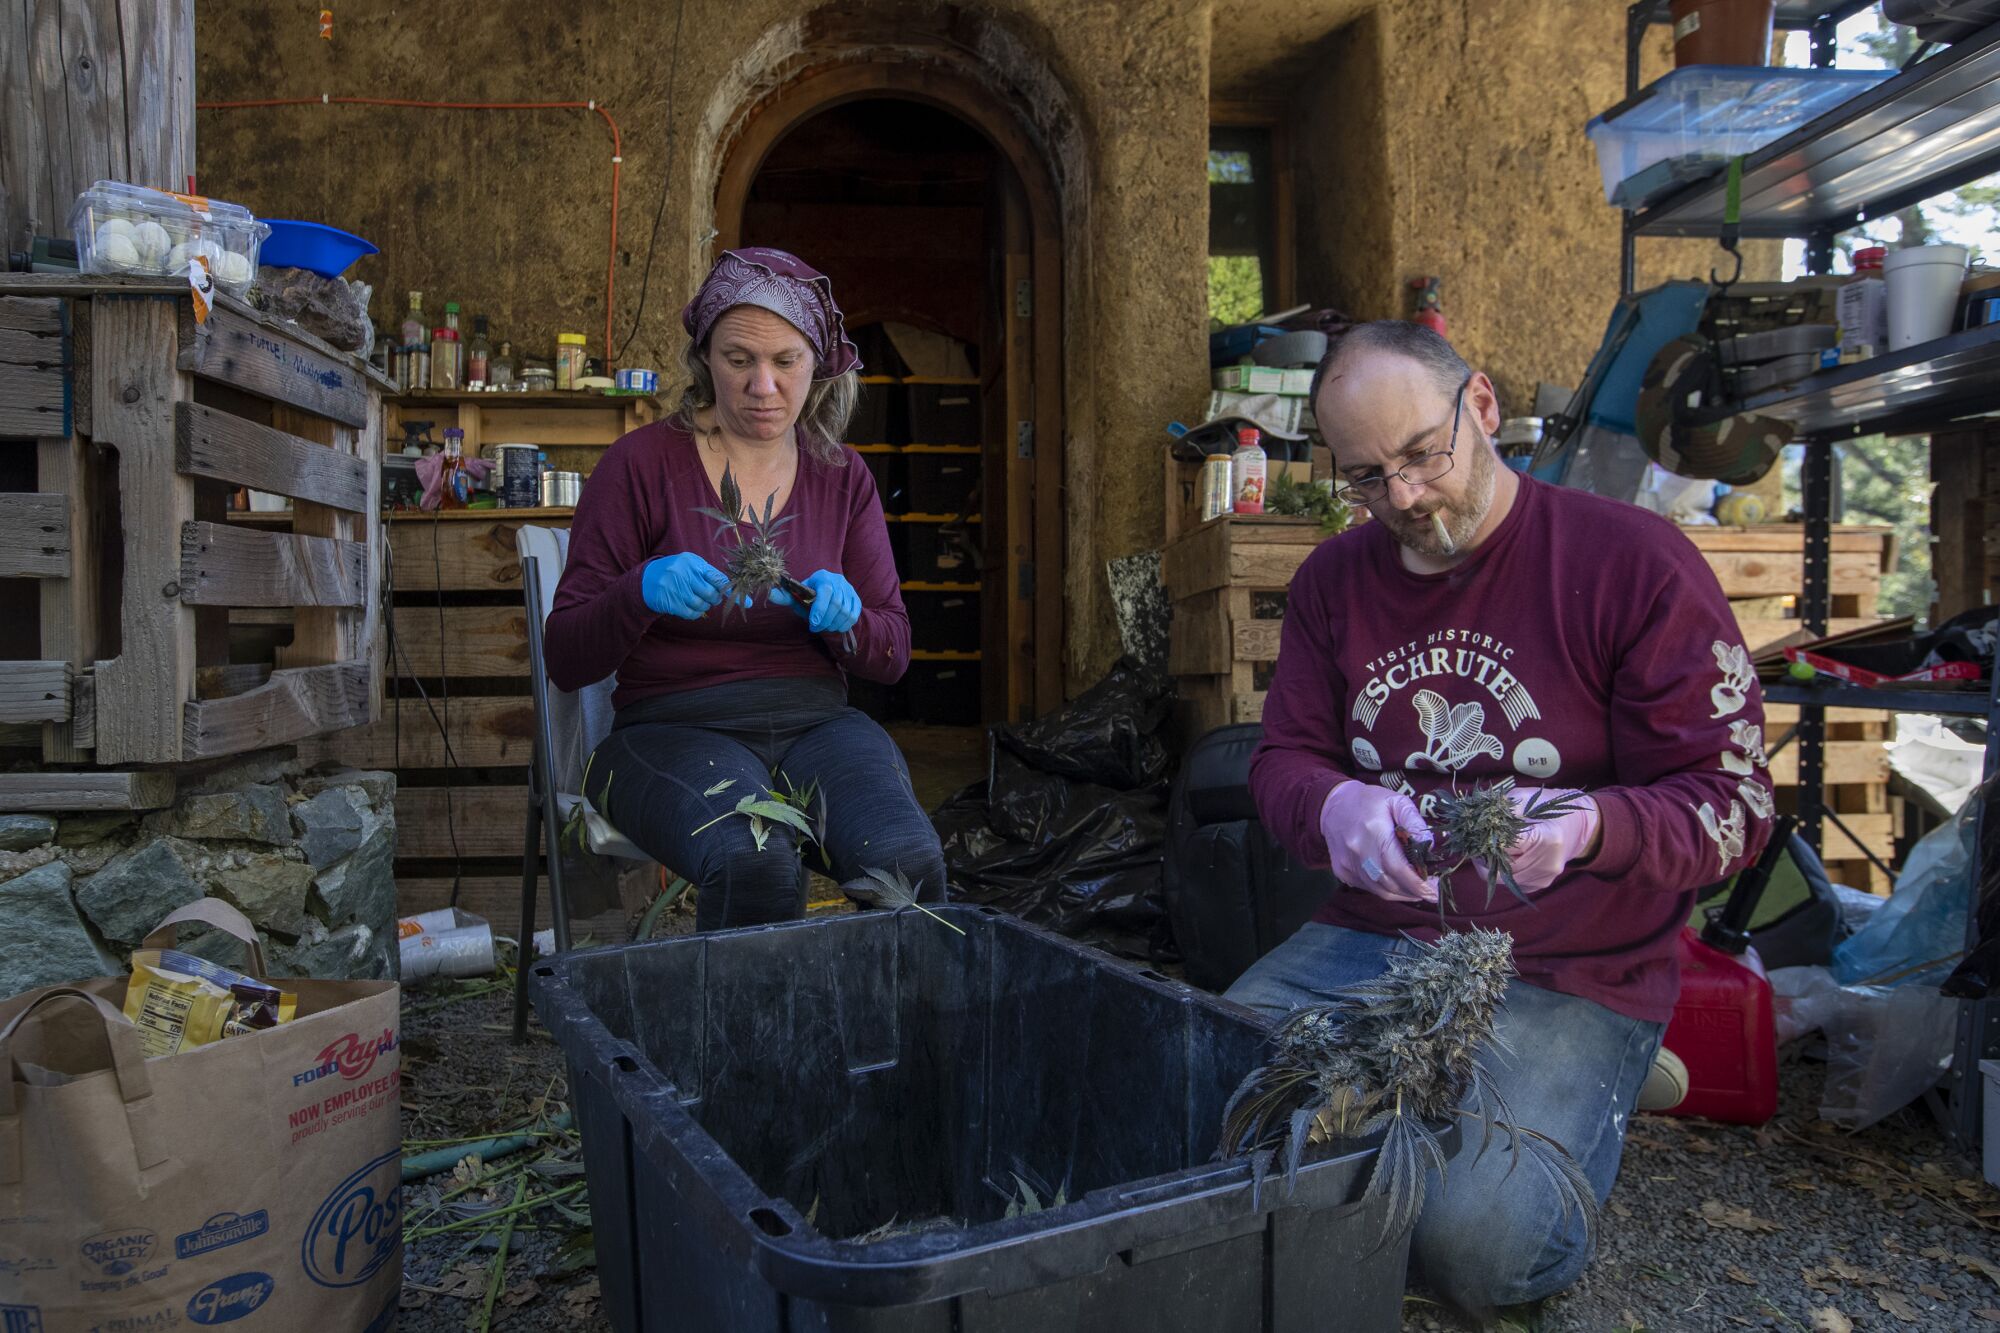 Wendy Kornberg and James Beurer sit and trim cannabis at their farm.